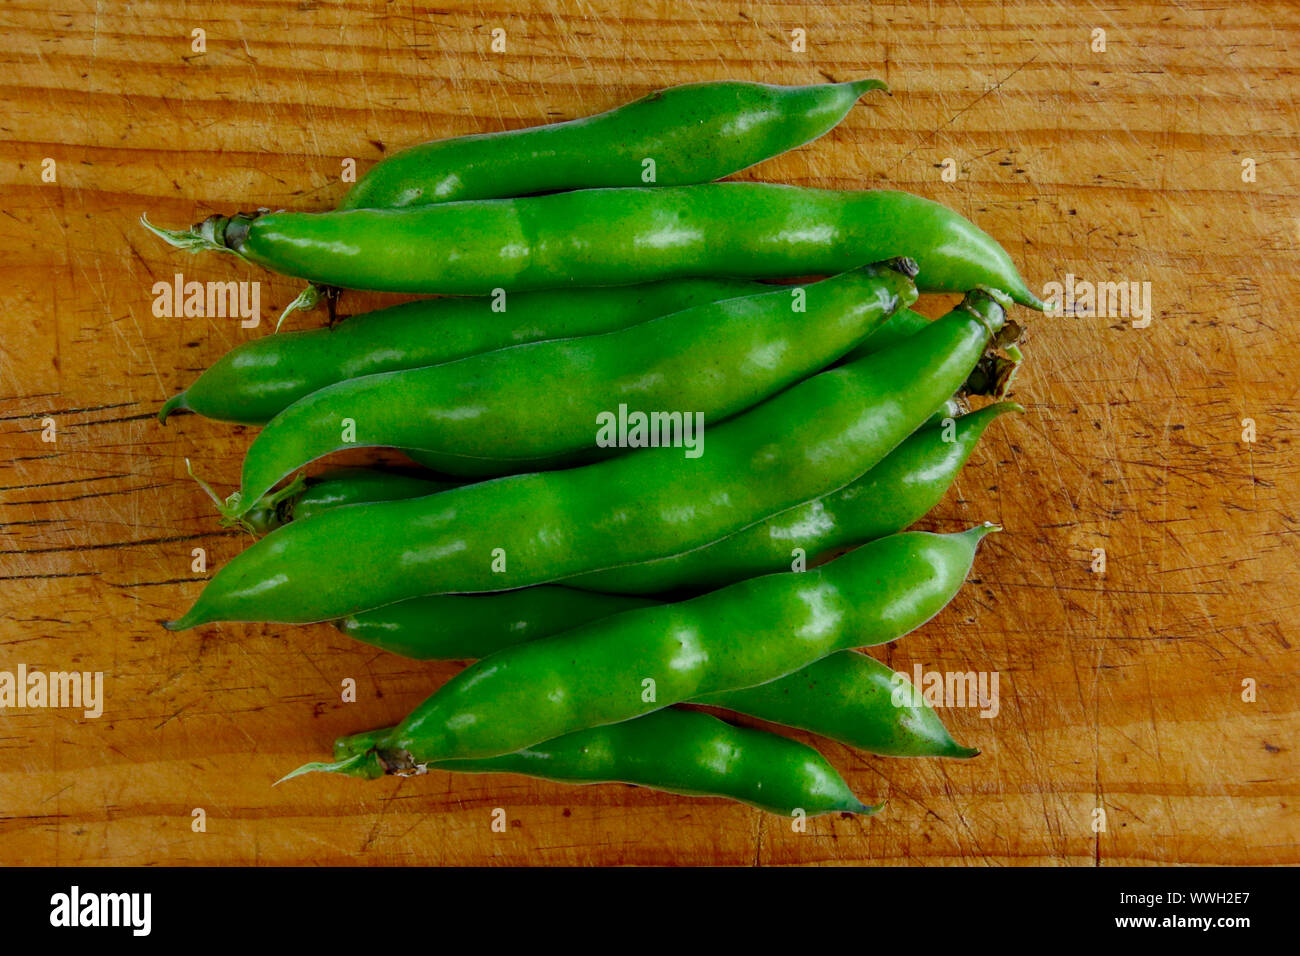 Broad beans. Stock Photo